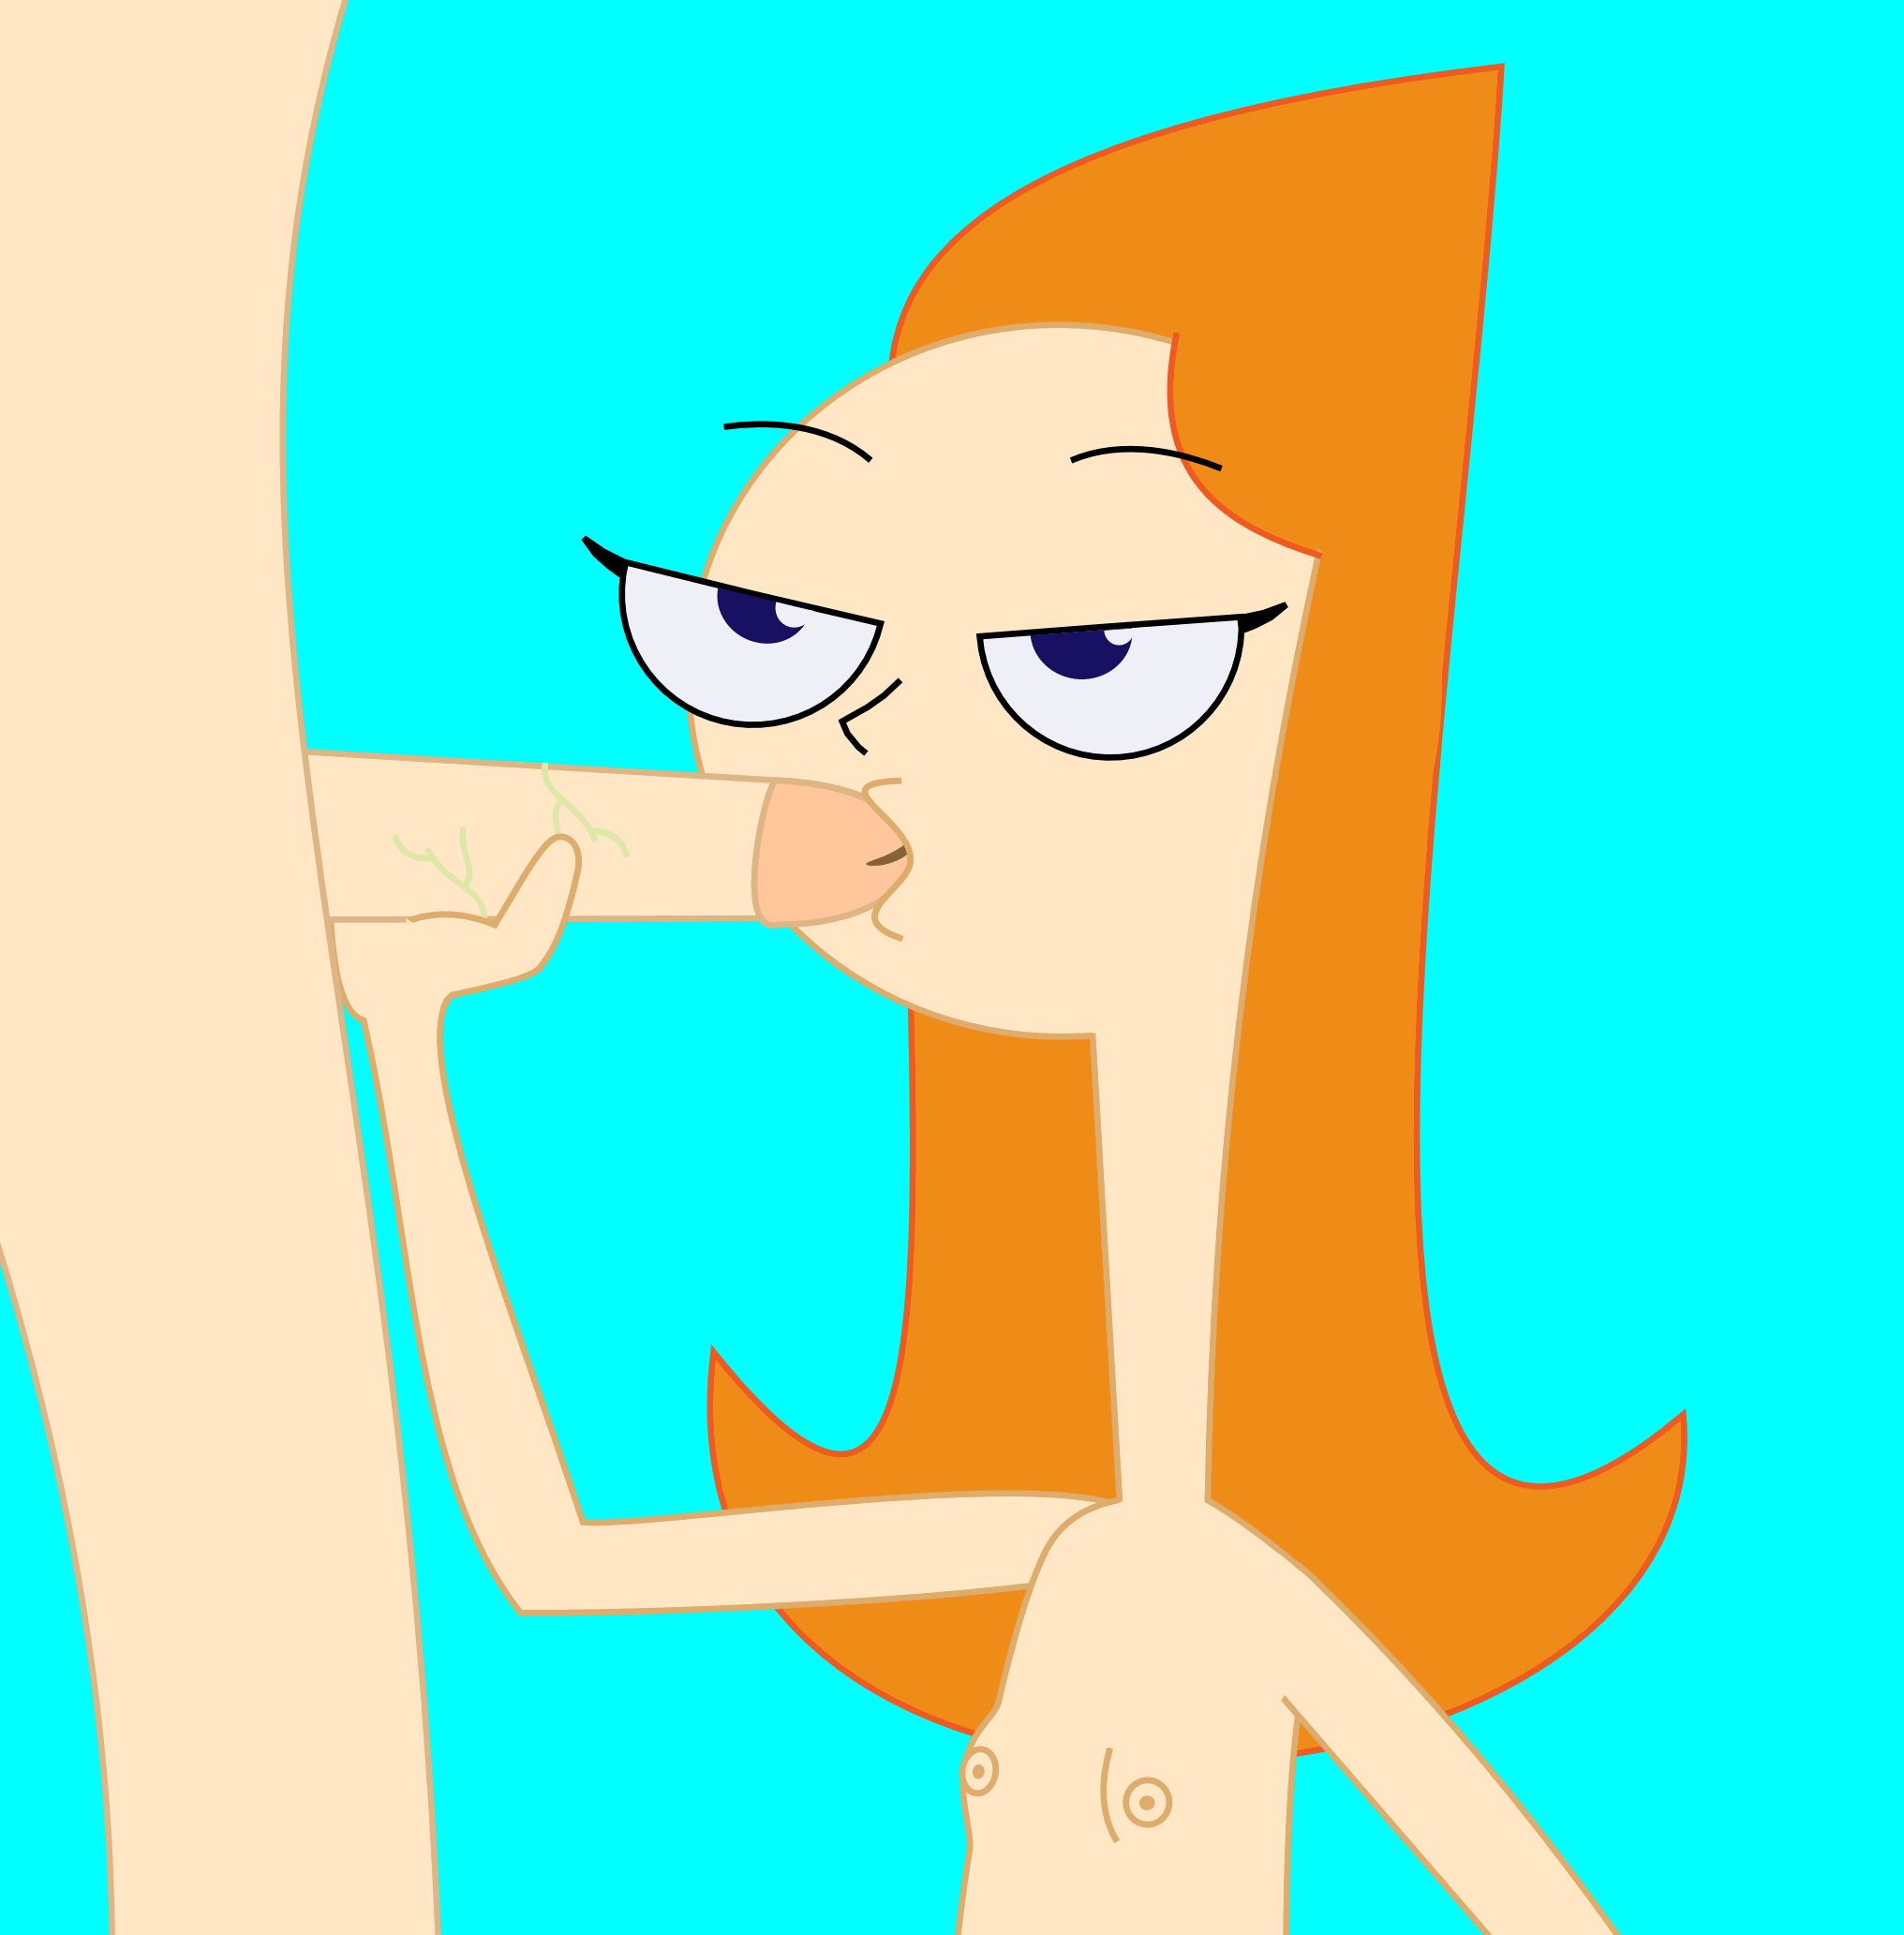 The Big ImageBoard (TBIB) - animated candace flynn fuchuker phineas and fer...